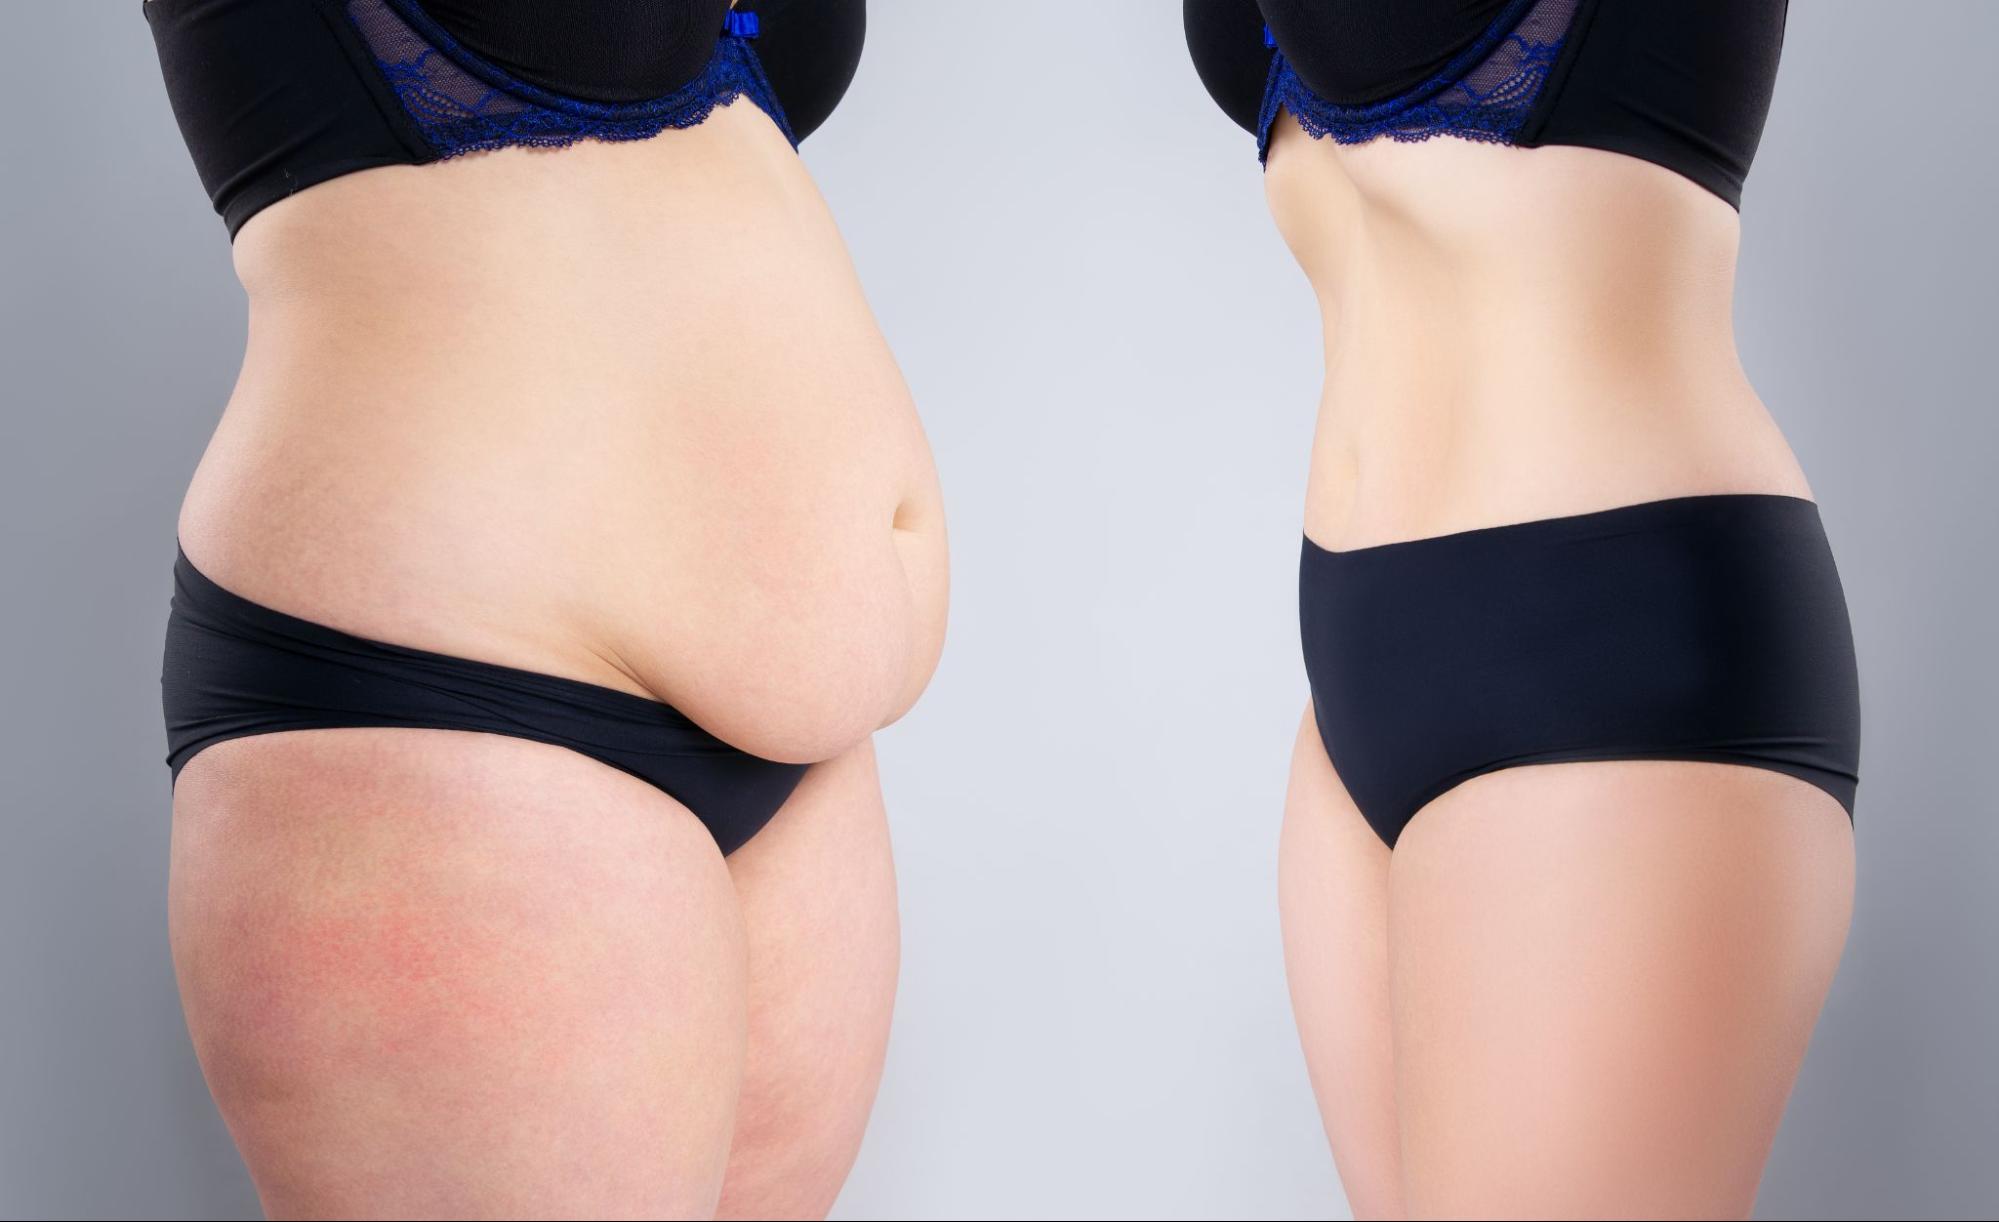 6 Tips for Aftercare Following Your Tummy Tuck